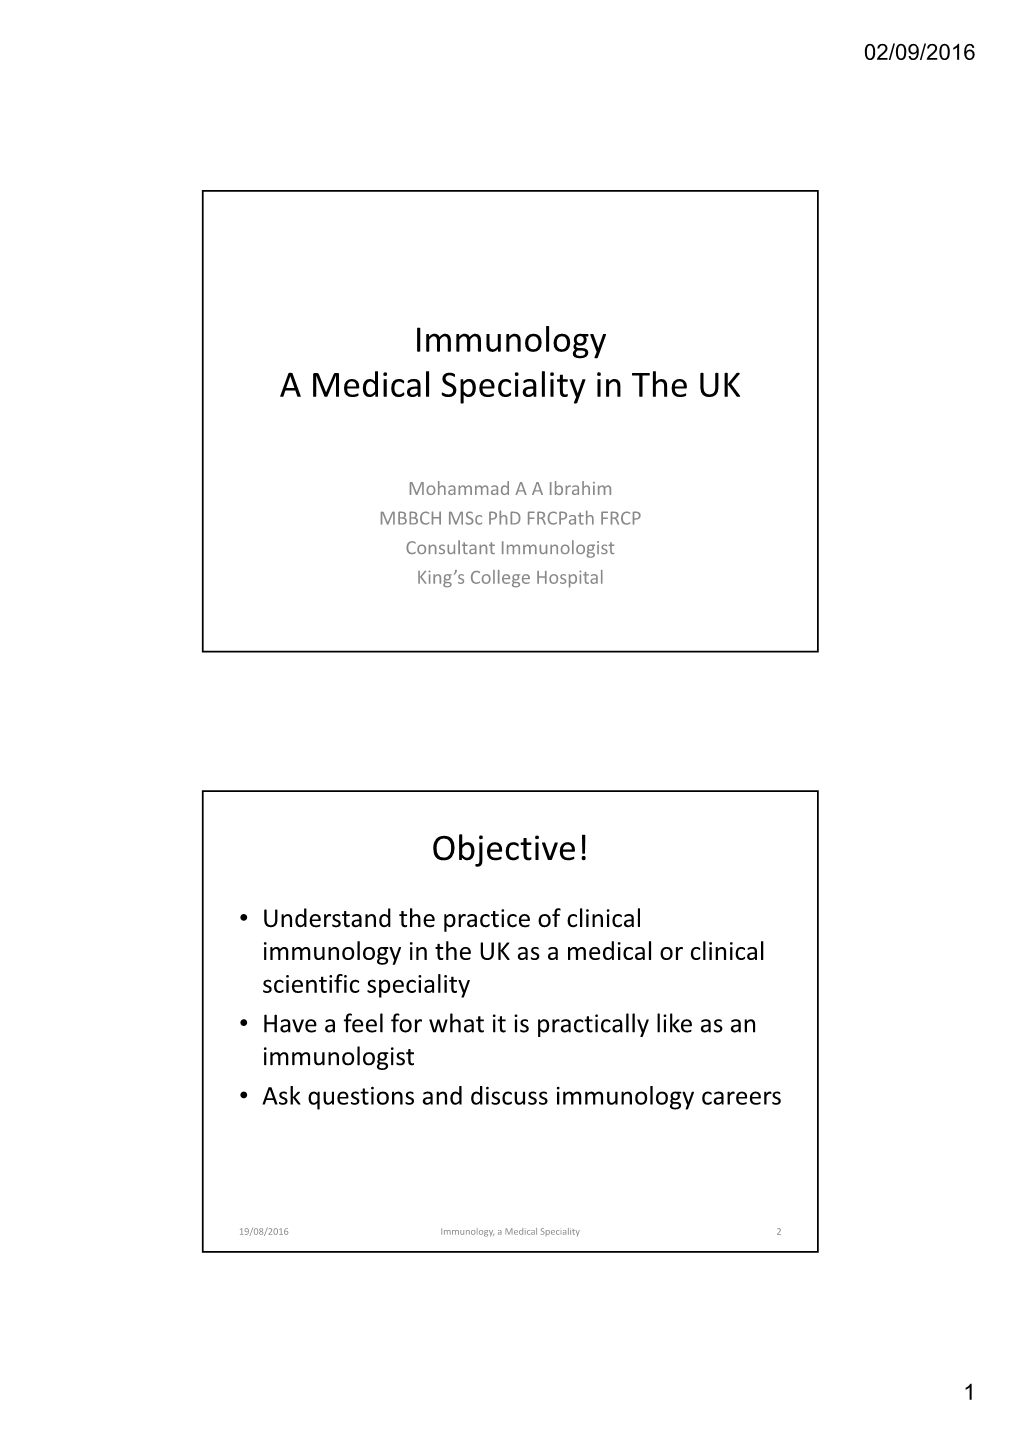 Immunology a Medical Speciality in the UK